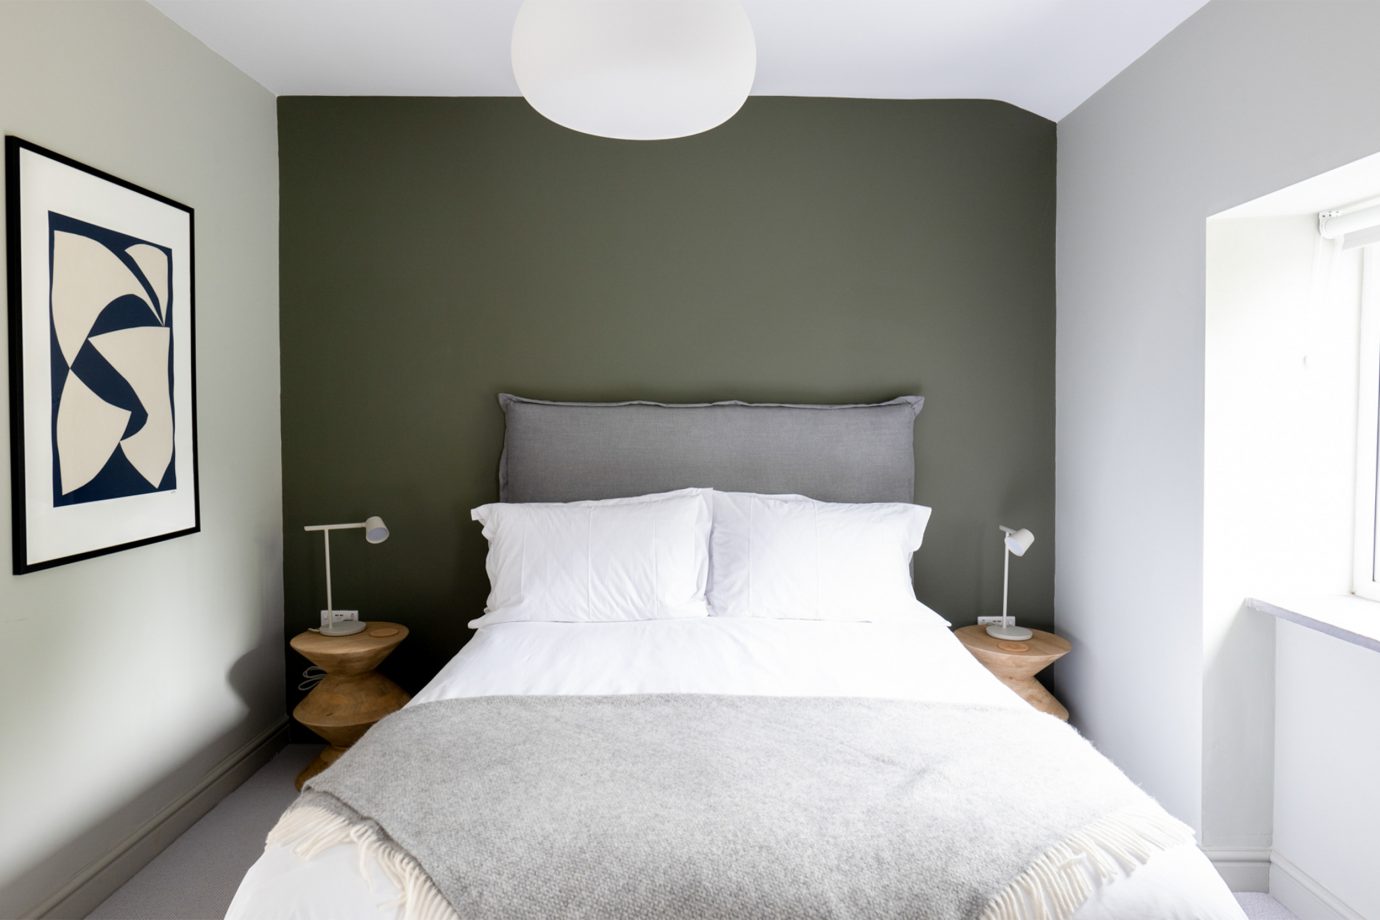 Bedroom, bed, green wall, painting, bedside table, window, natural light